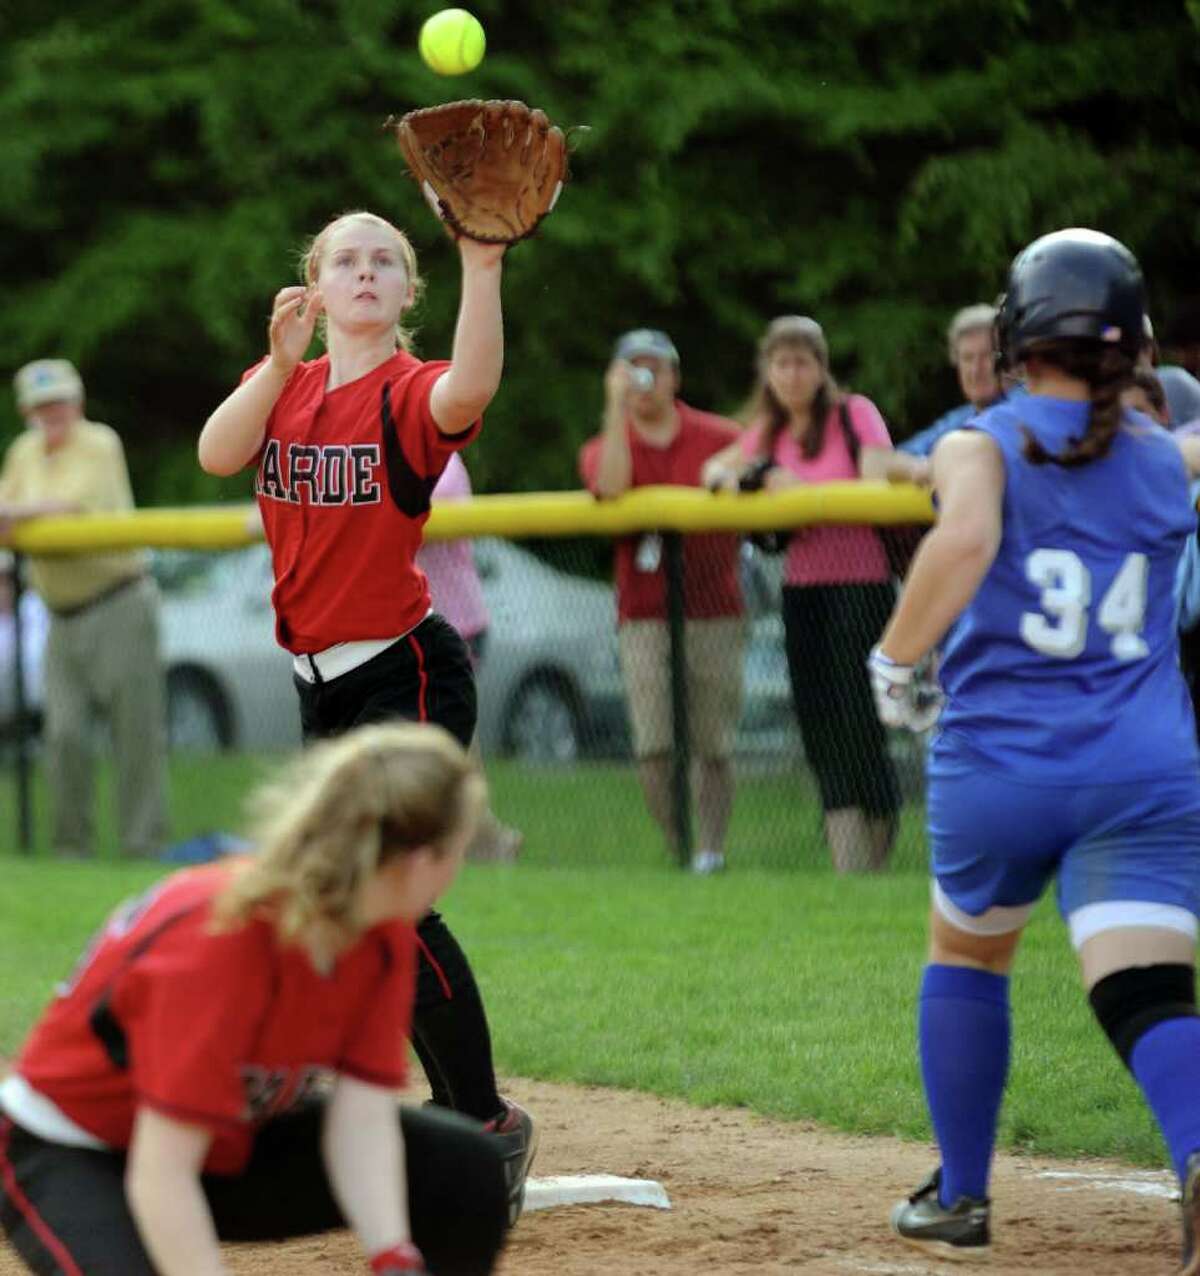 Highlights from girls FCIAC softball quarterfinals between Fairfield Warde and Darien in Darien on Tuesday May 24, 2011.